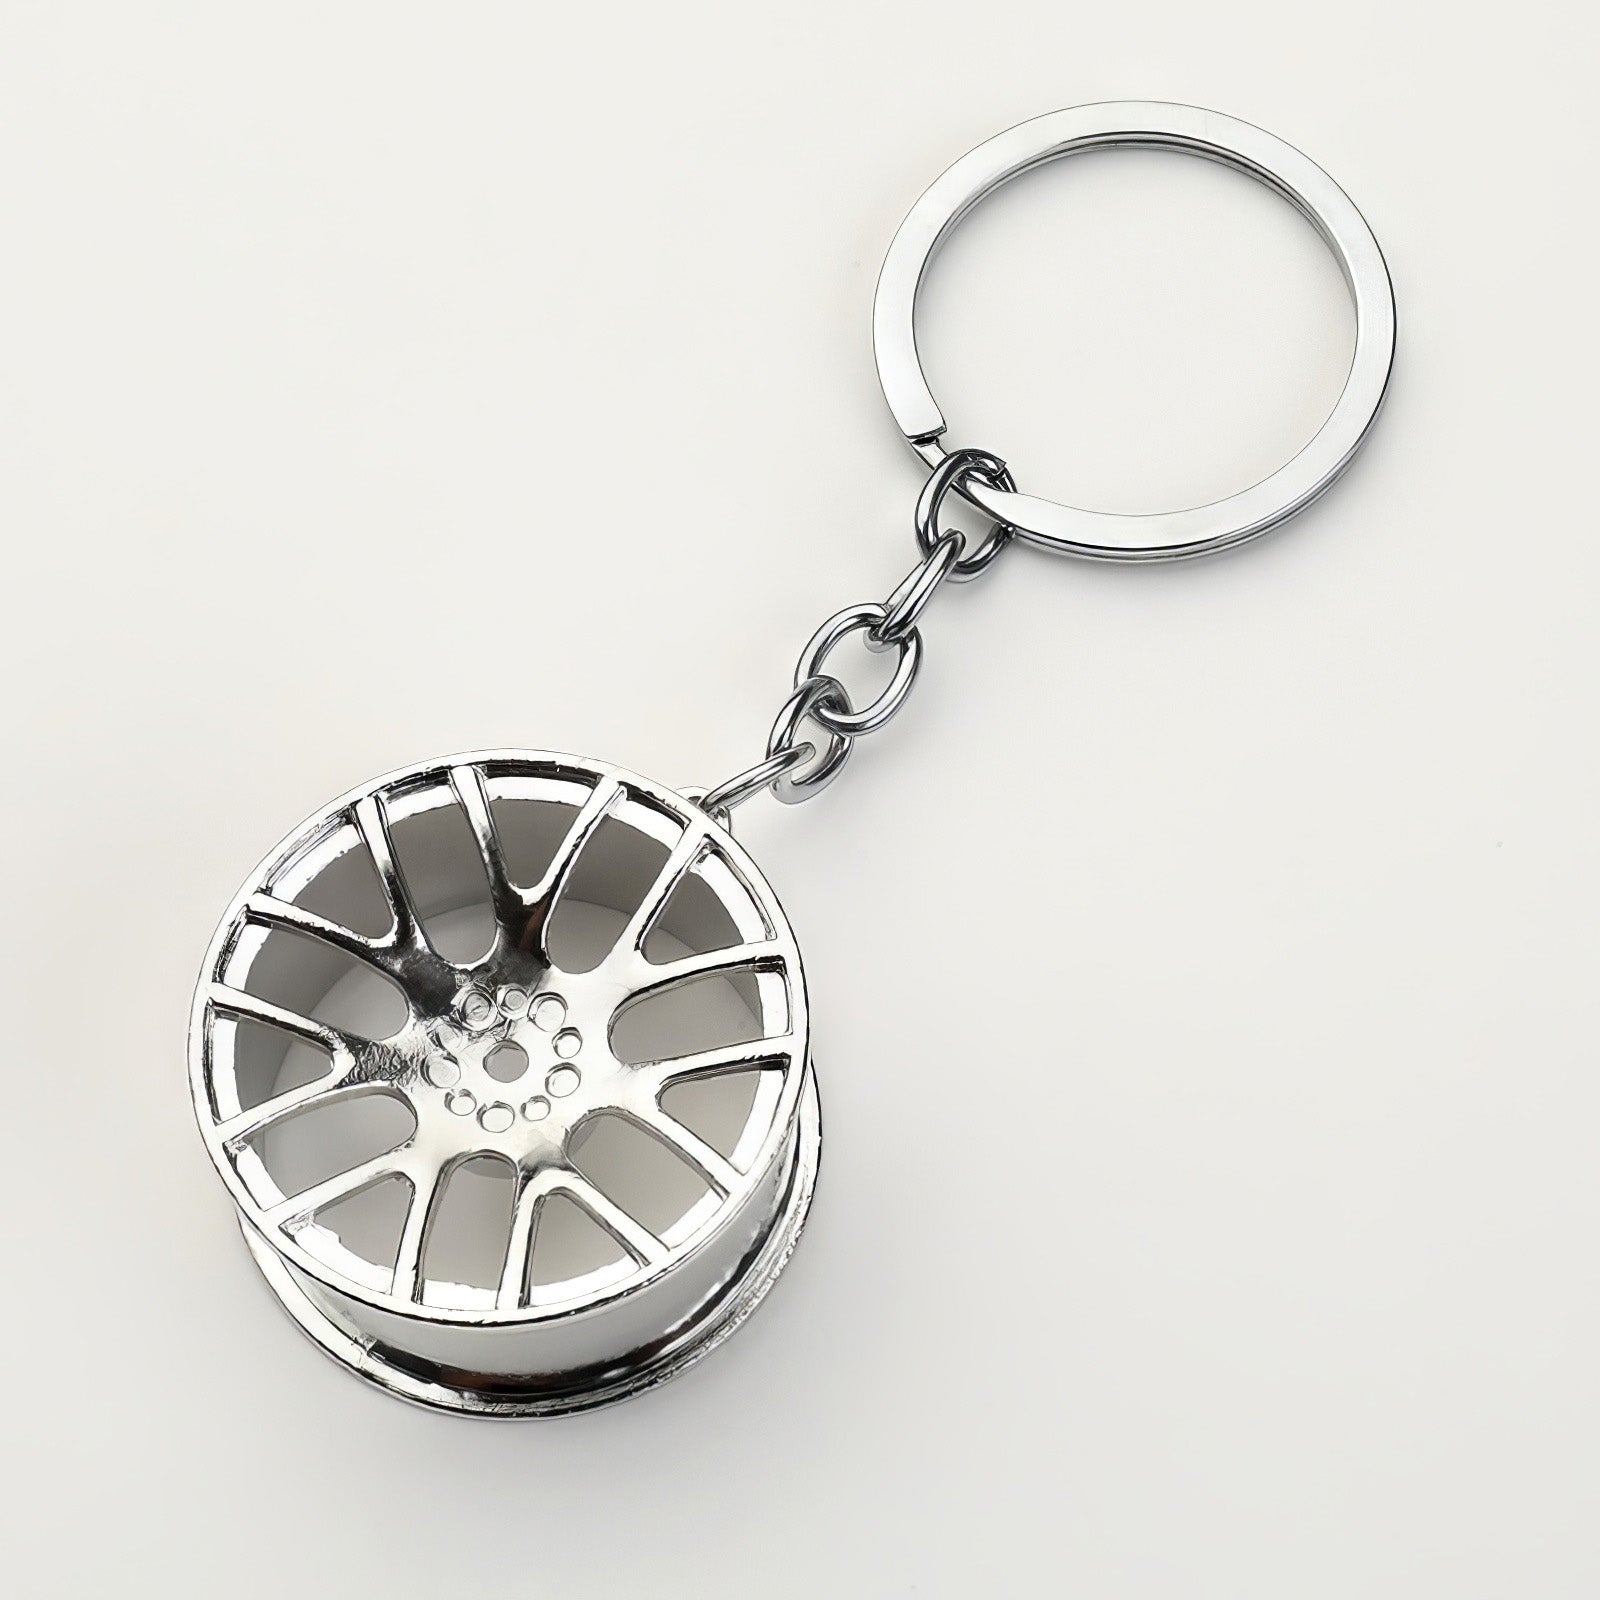 Concave wheel keychain in silver.